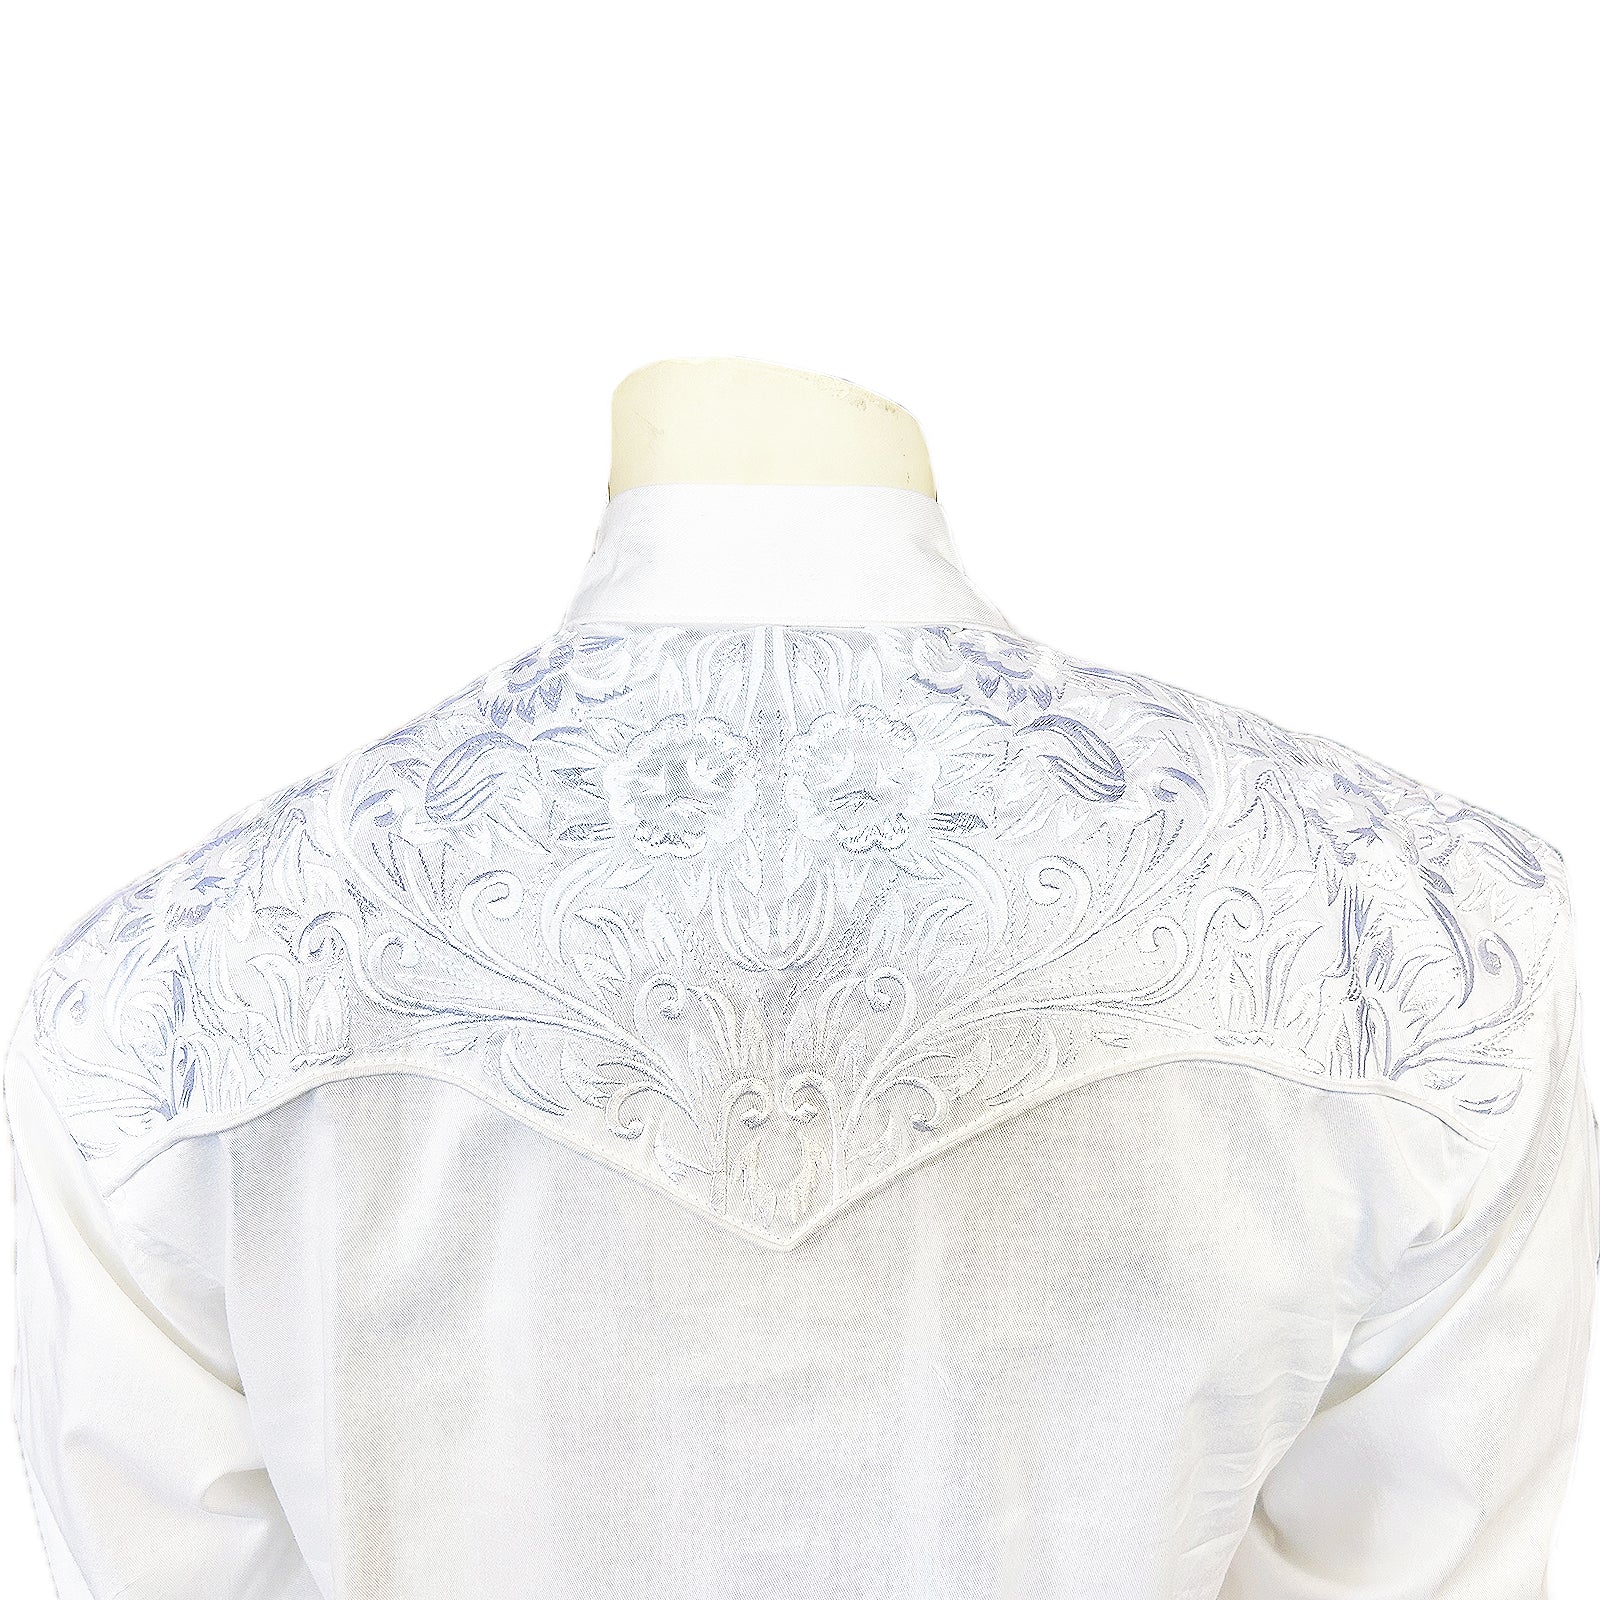 Men's Vintage Tooling Embroidered White-on-White Western Shirt